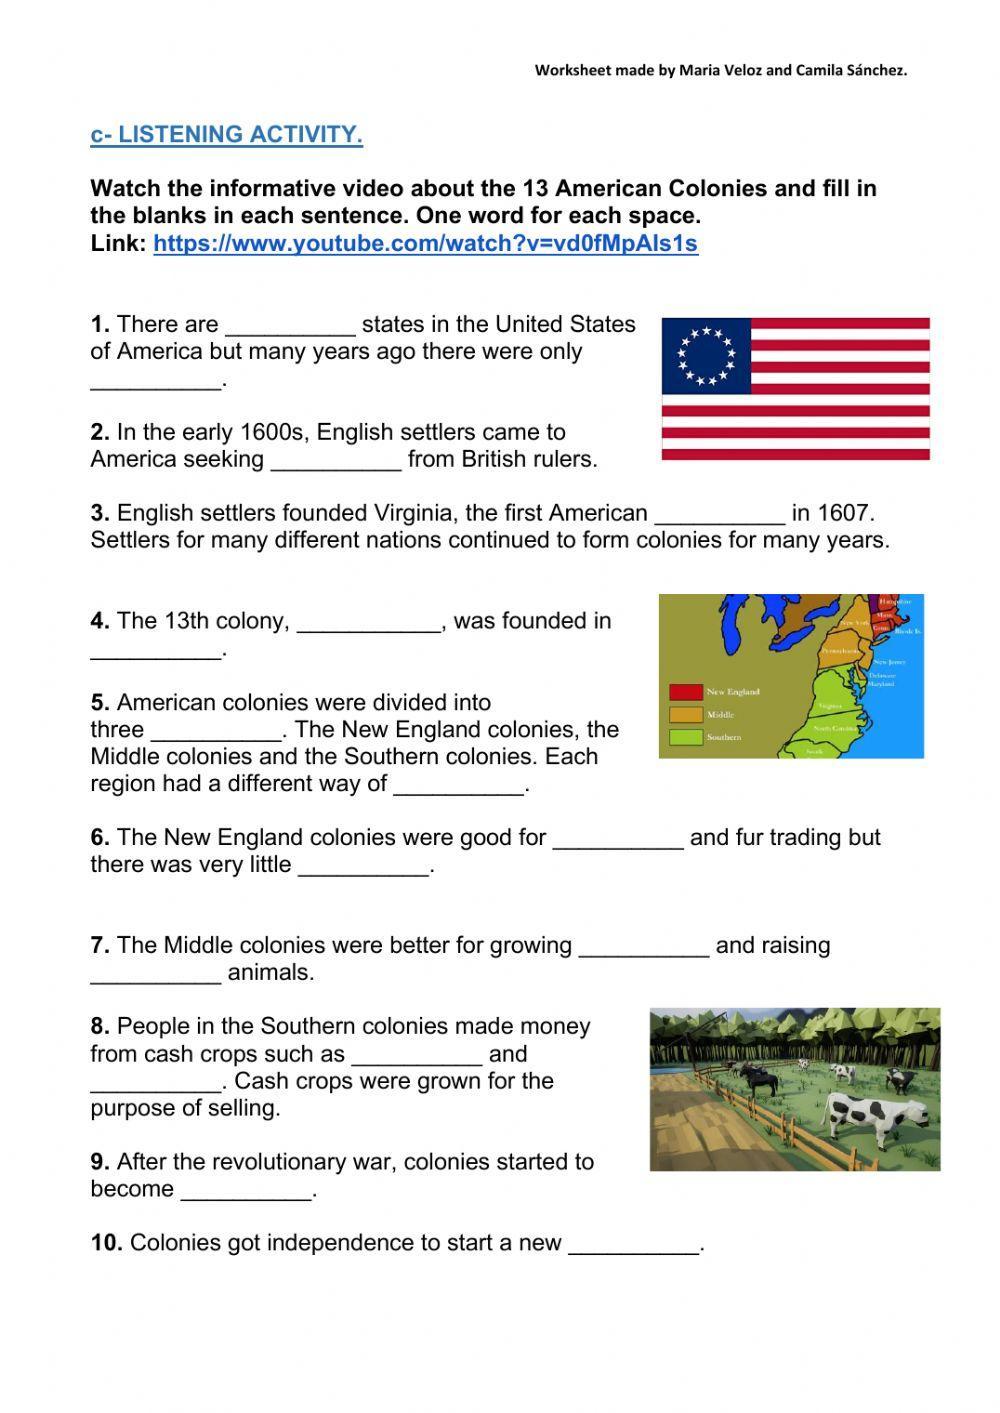 13 colonies (reading and listening comprehension)